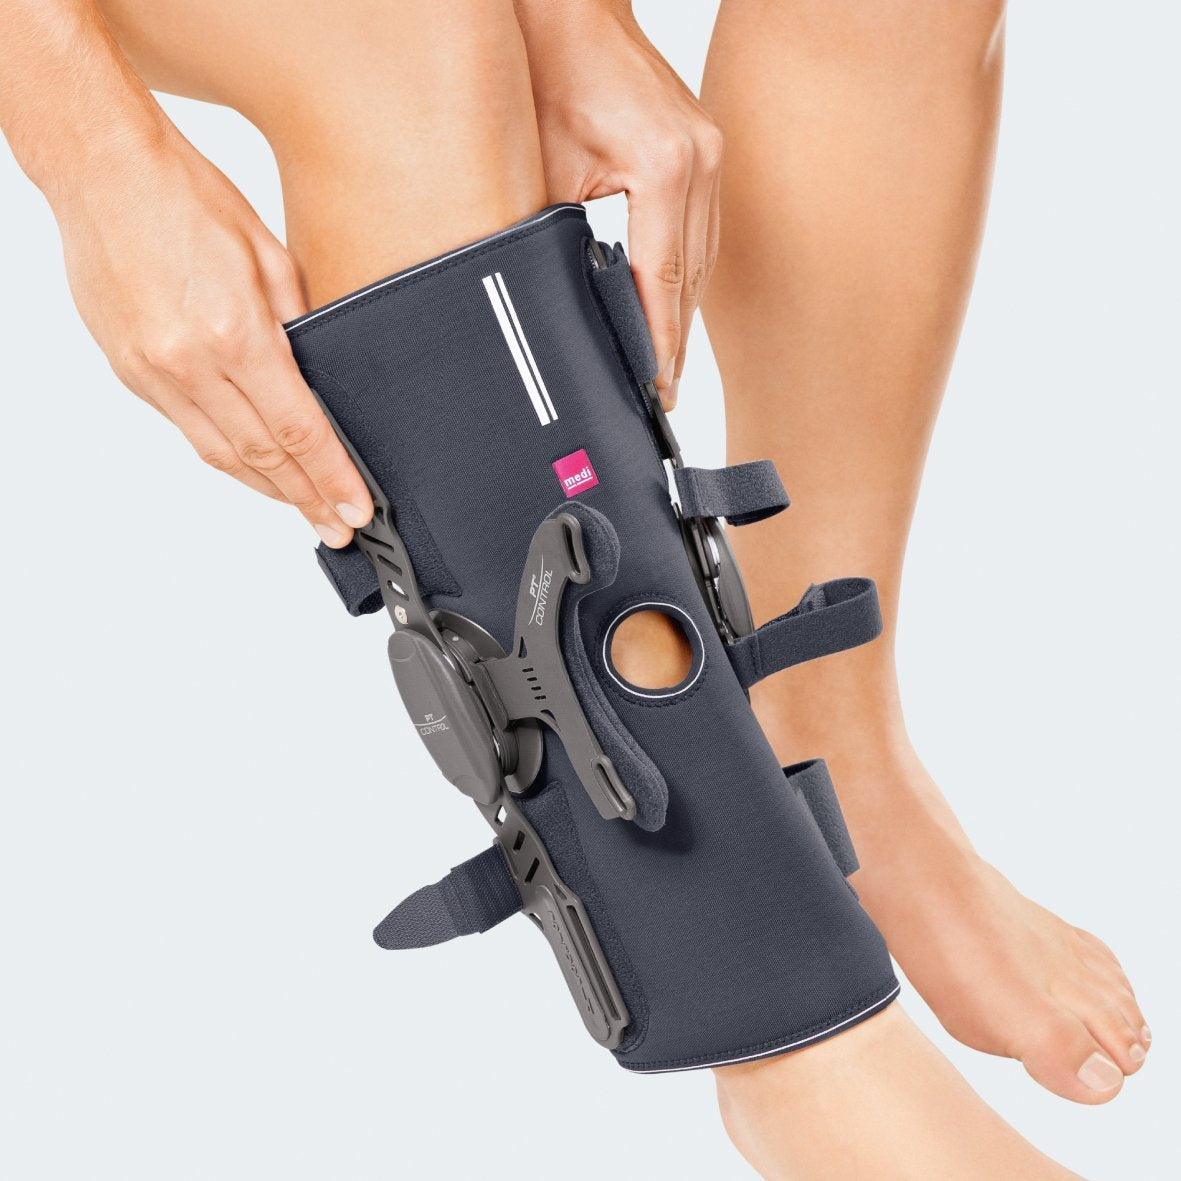 Knee Braces : Buy Knee Brace & Support Online in Canada at Best Price –  Physio supplies canada